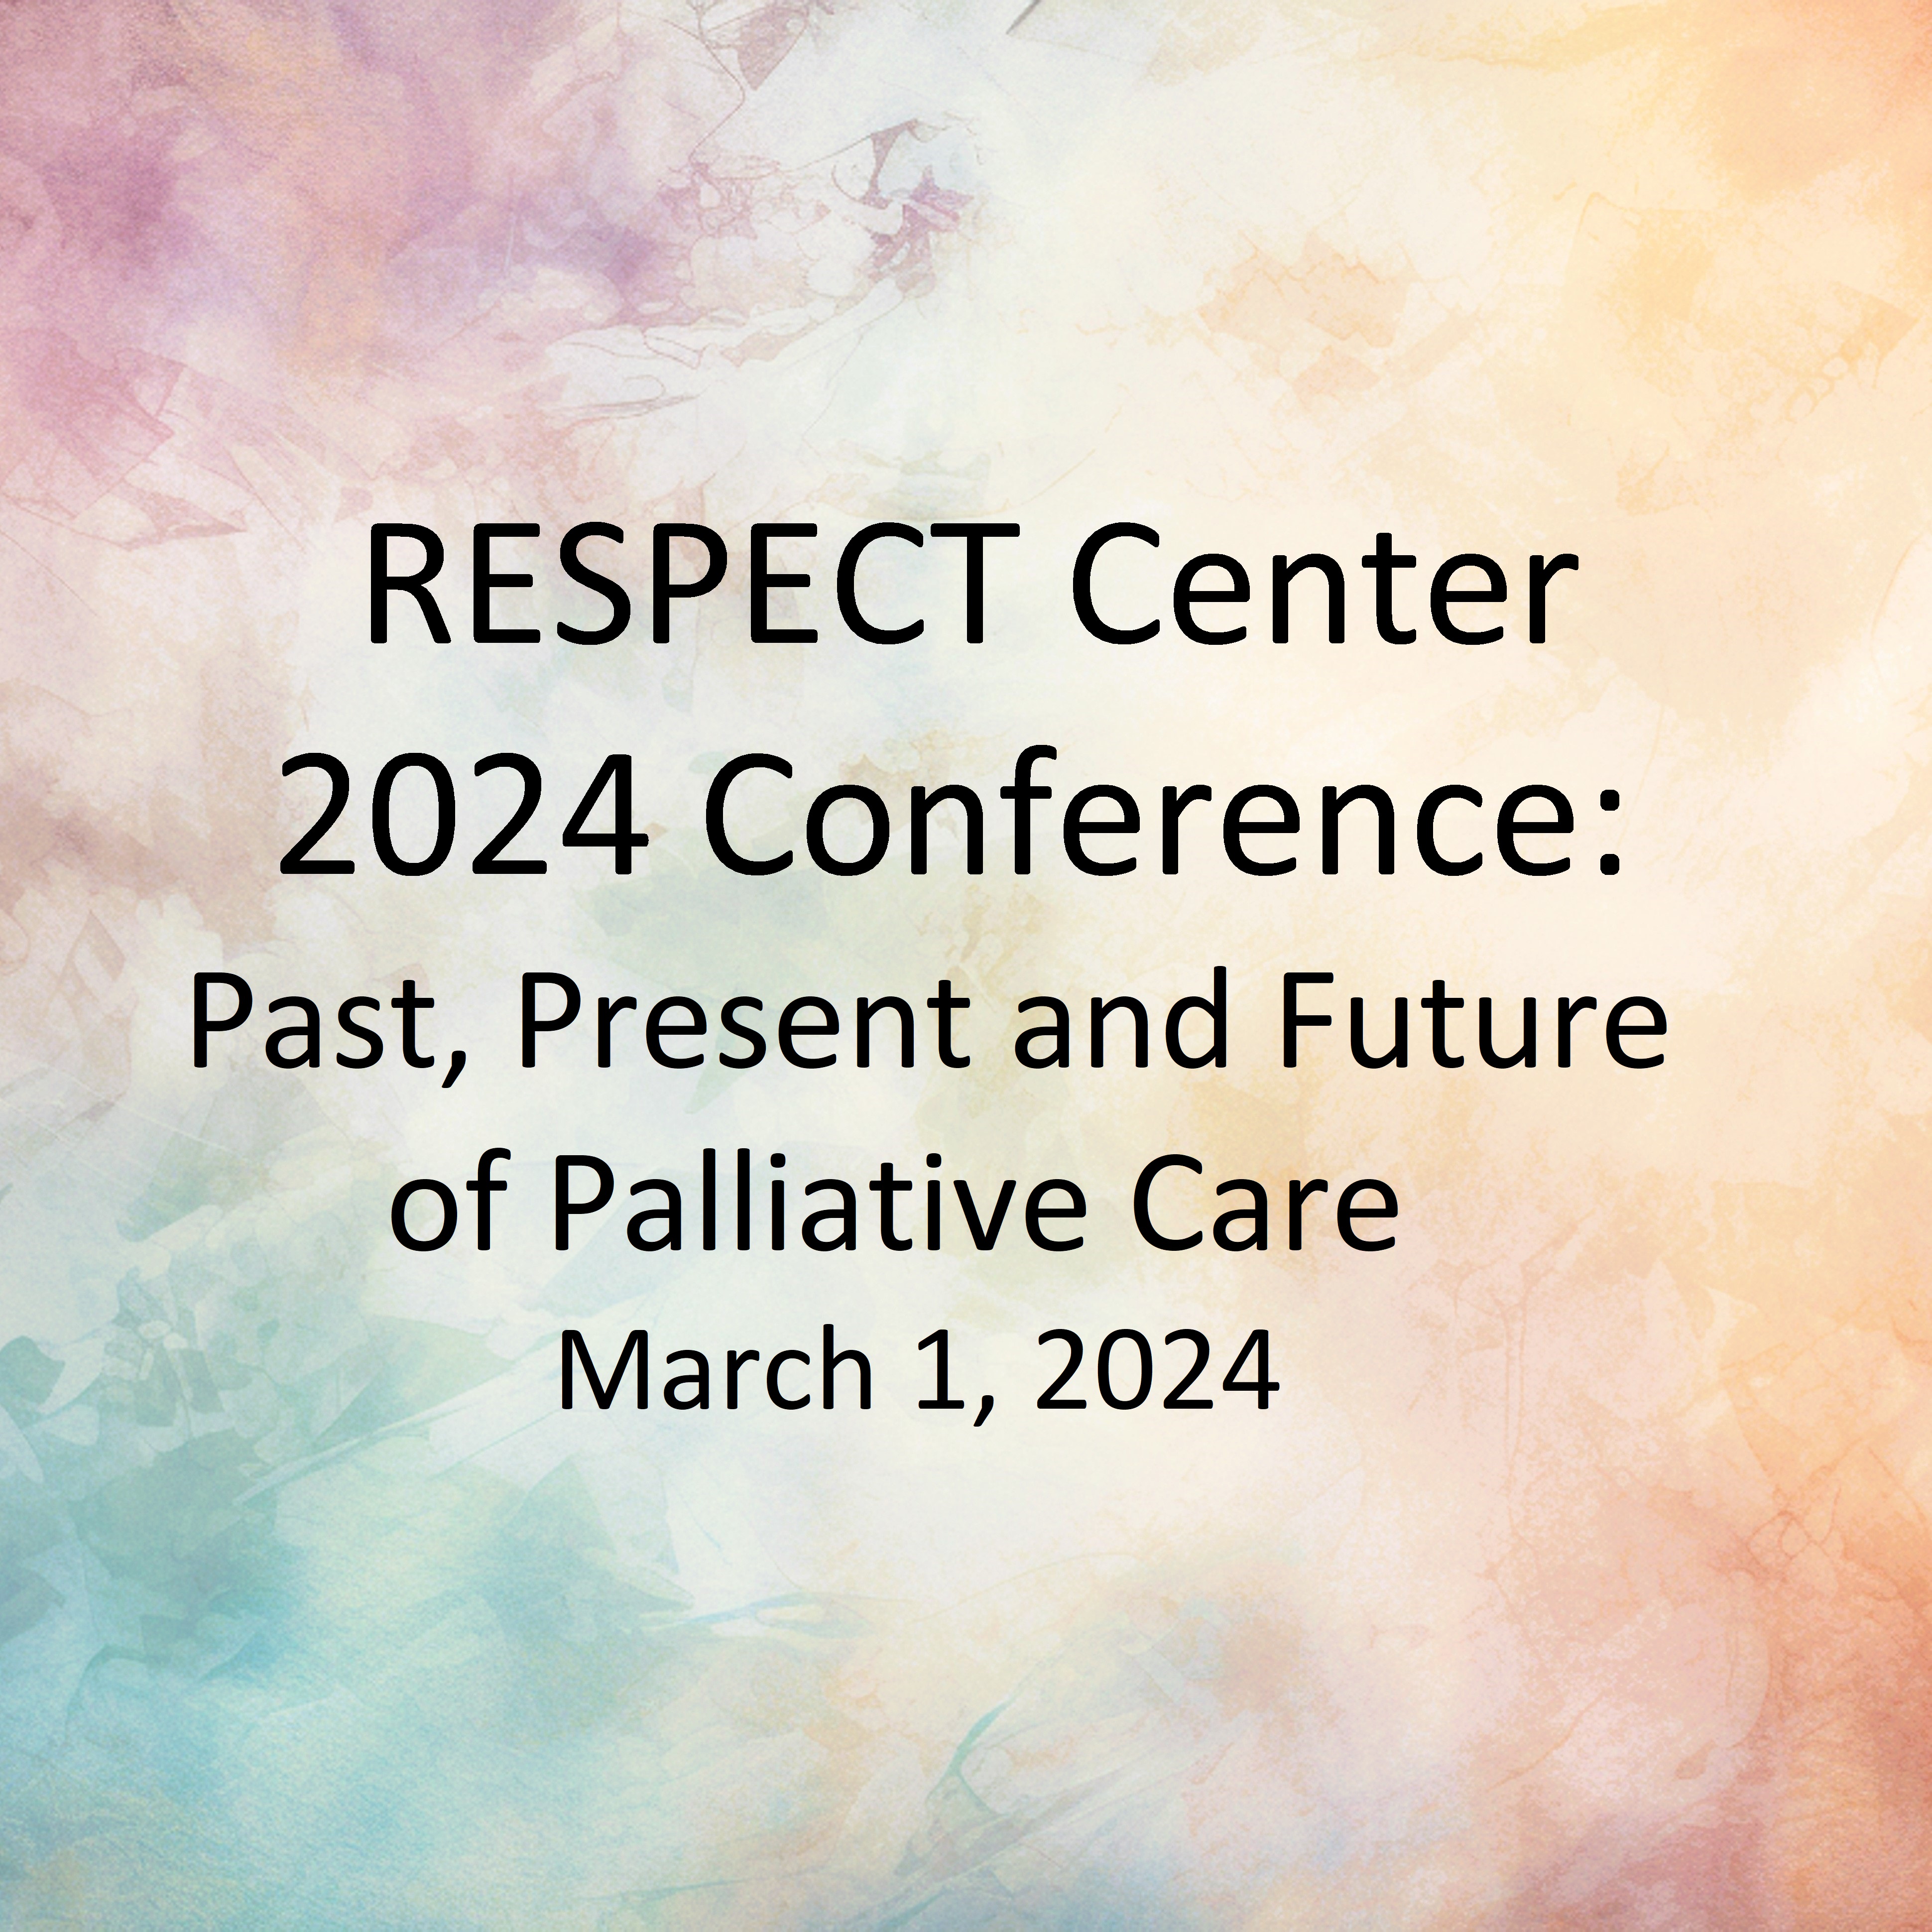 RESPECT Center 2024 Conference: Past, Present and Future of Palliative Care Banner